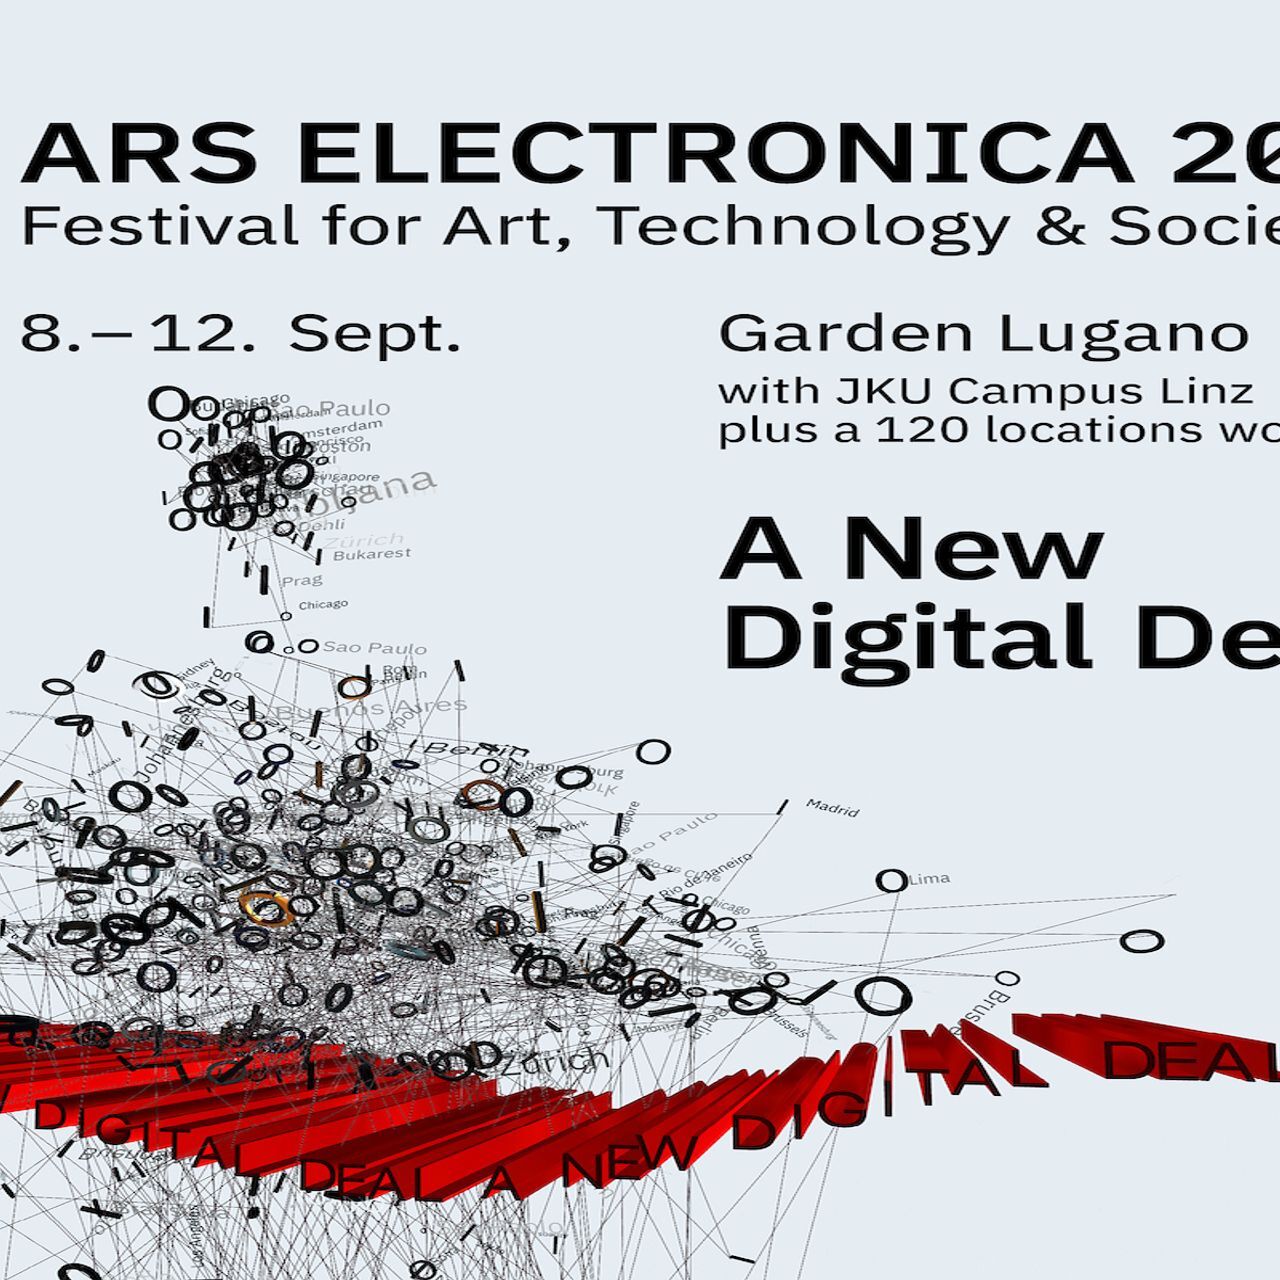 The poster of the Ars Electronica festival at its debut in Lugano on 9-12 September 2021